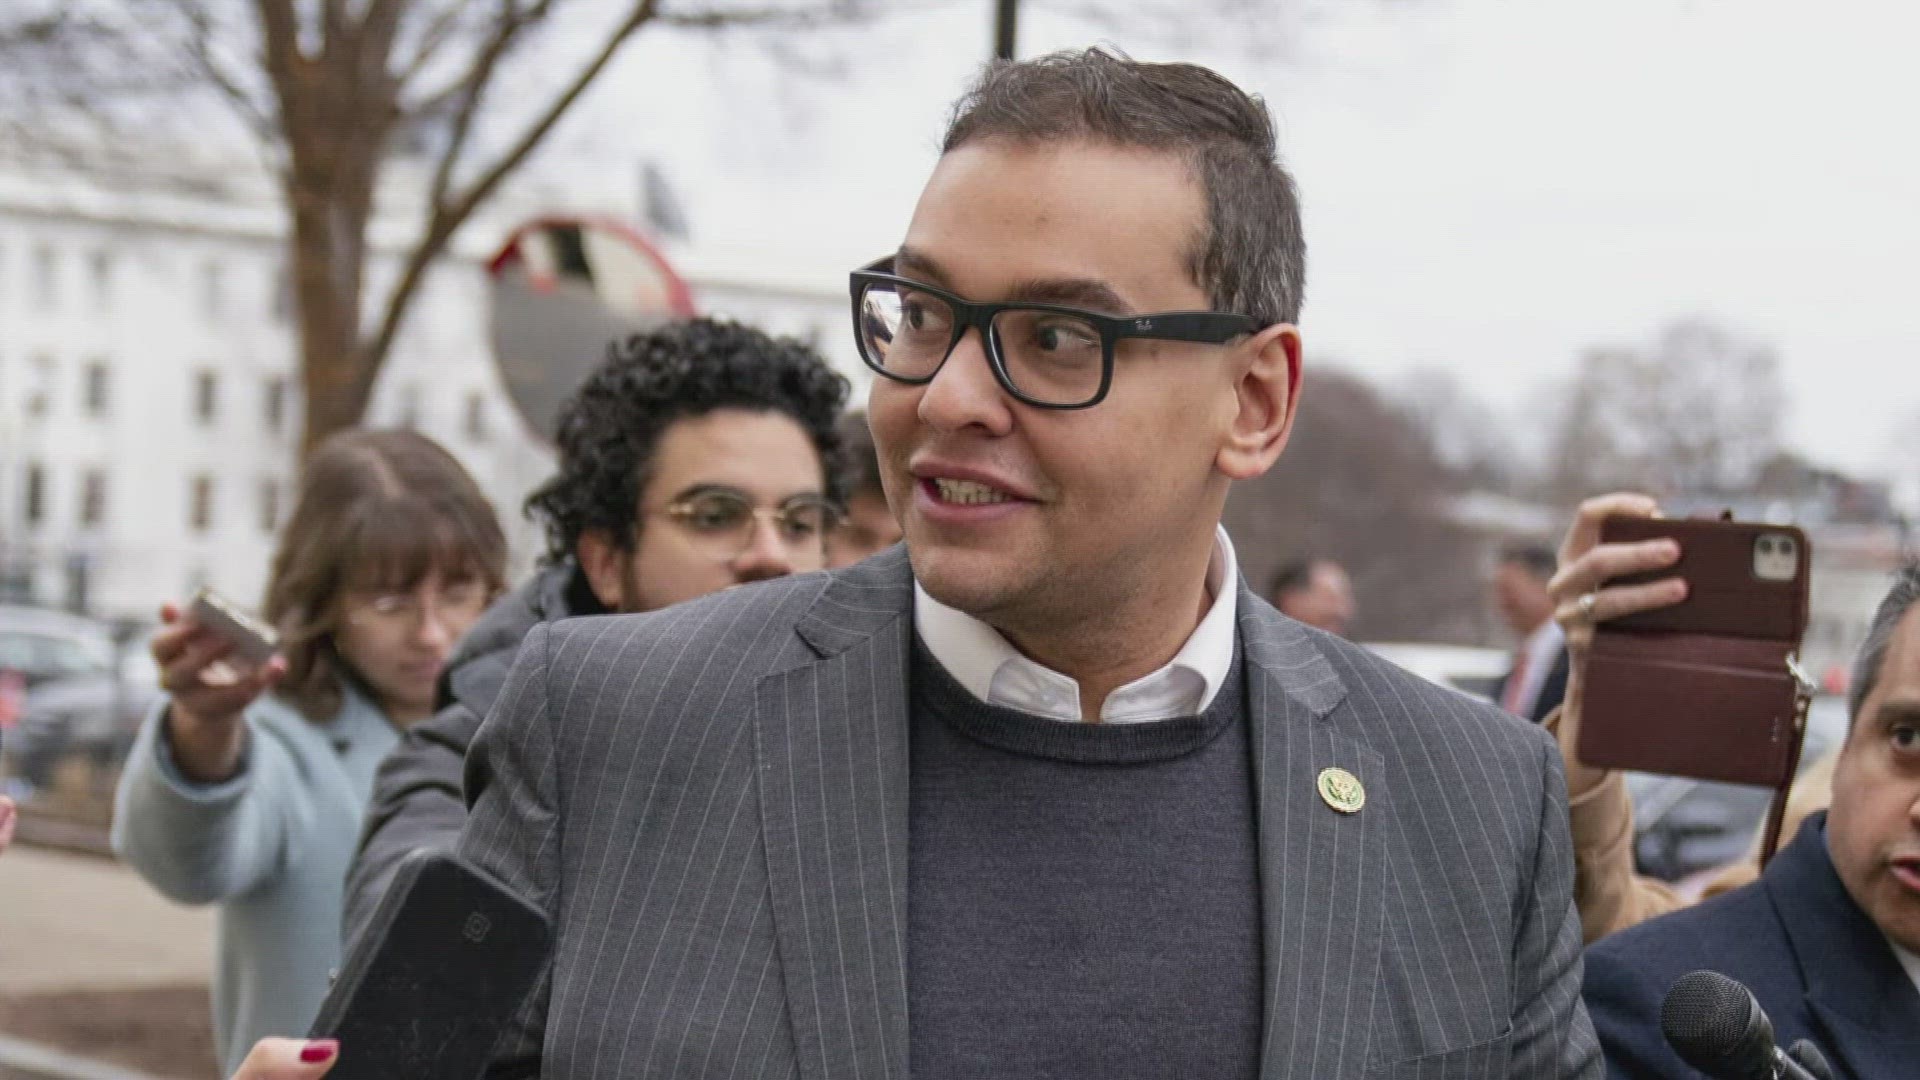 Congressman George Santos has been arrested on federal charges alleging he embezzled money from his campaign and lied to Congress about his income.